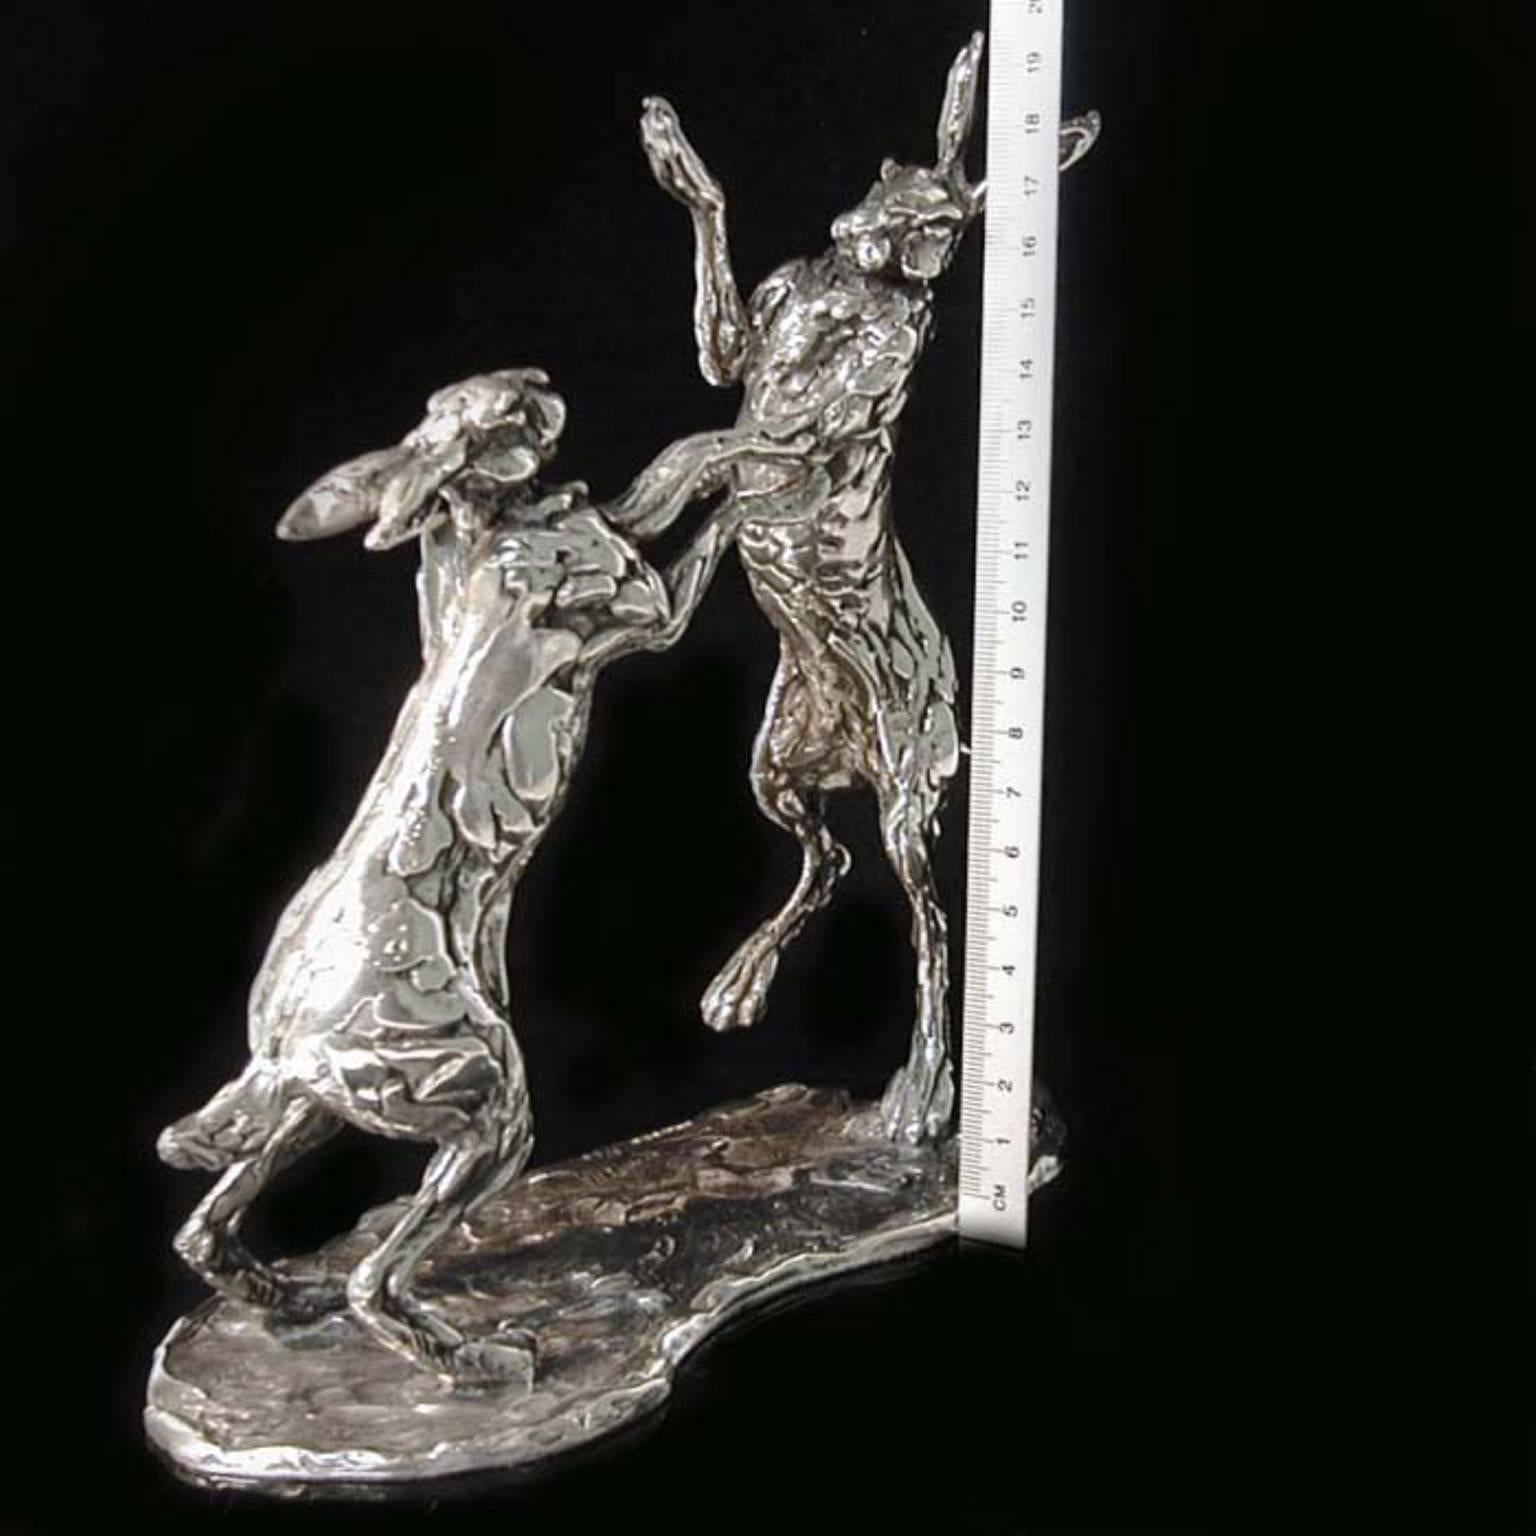 Height 20.5cm x length 20cm
1187 grams

A 'Boxing Hares' sterling silver sculpture by Lucy Kinsella, the limited edition pair of long eared brown hares caught mid boxing match, with one stood tall on stretched hind legs raining blows down on the